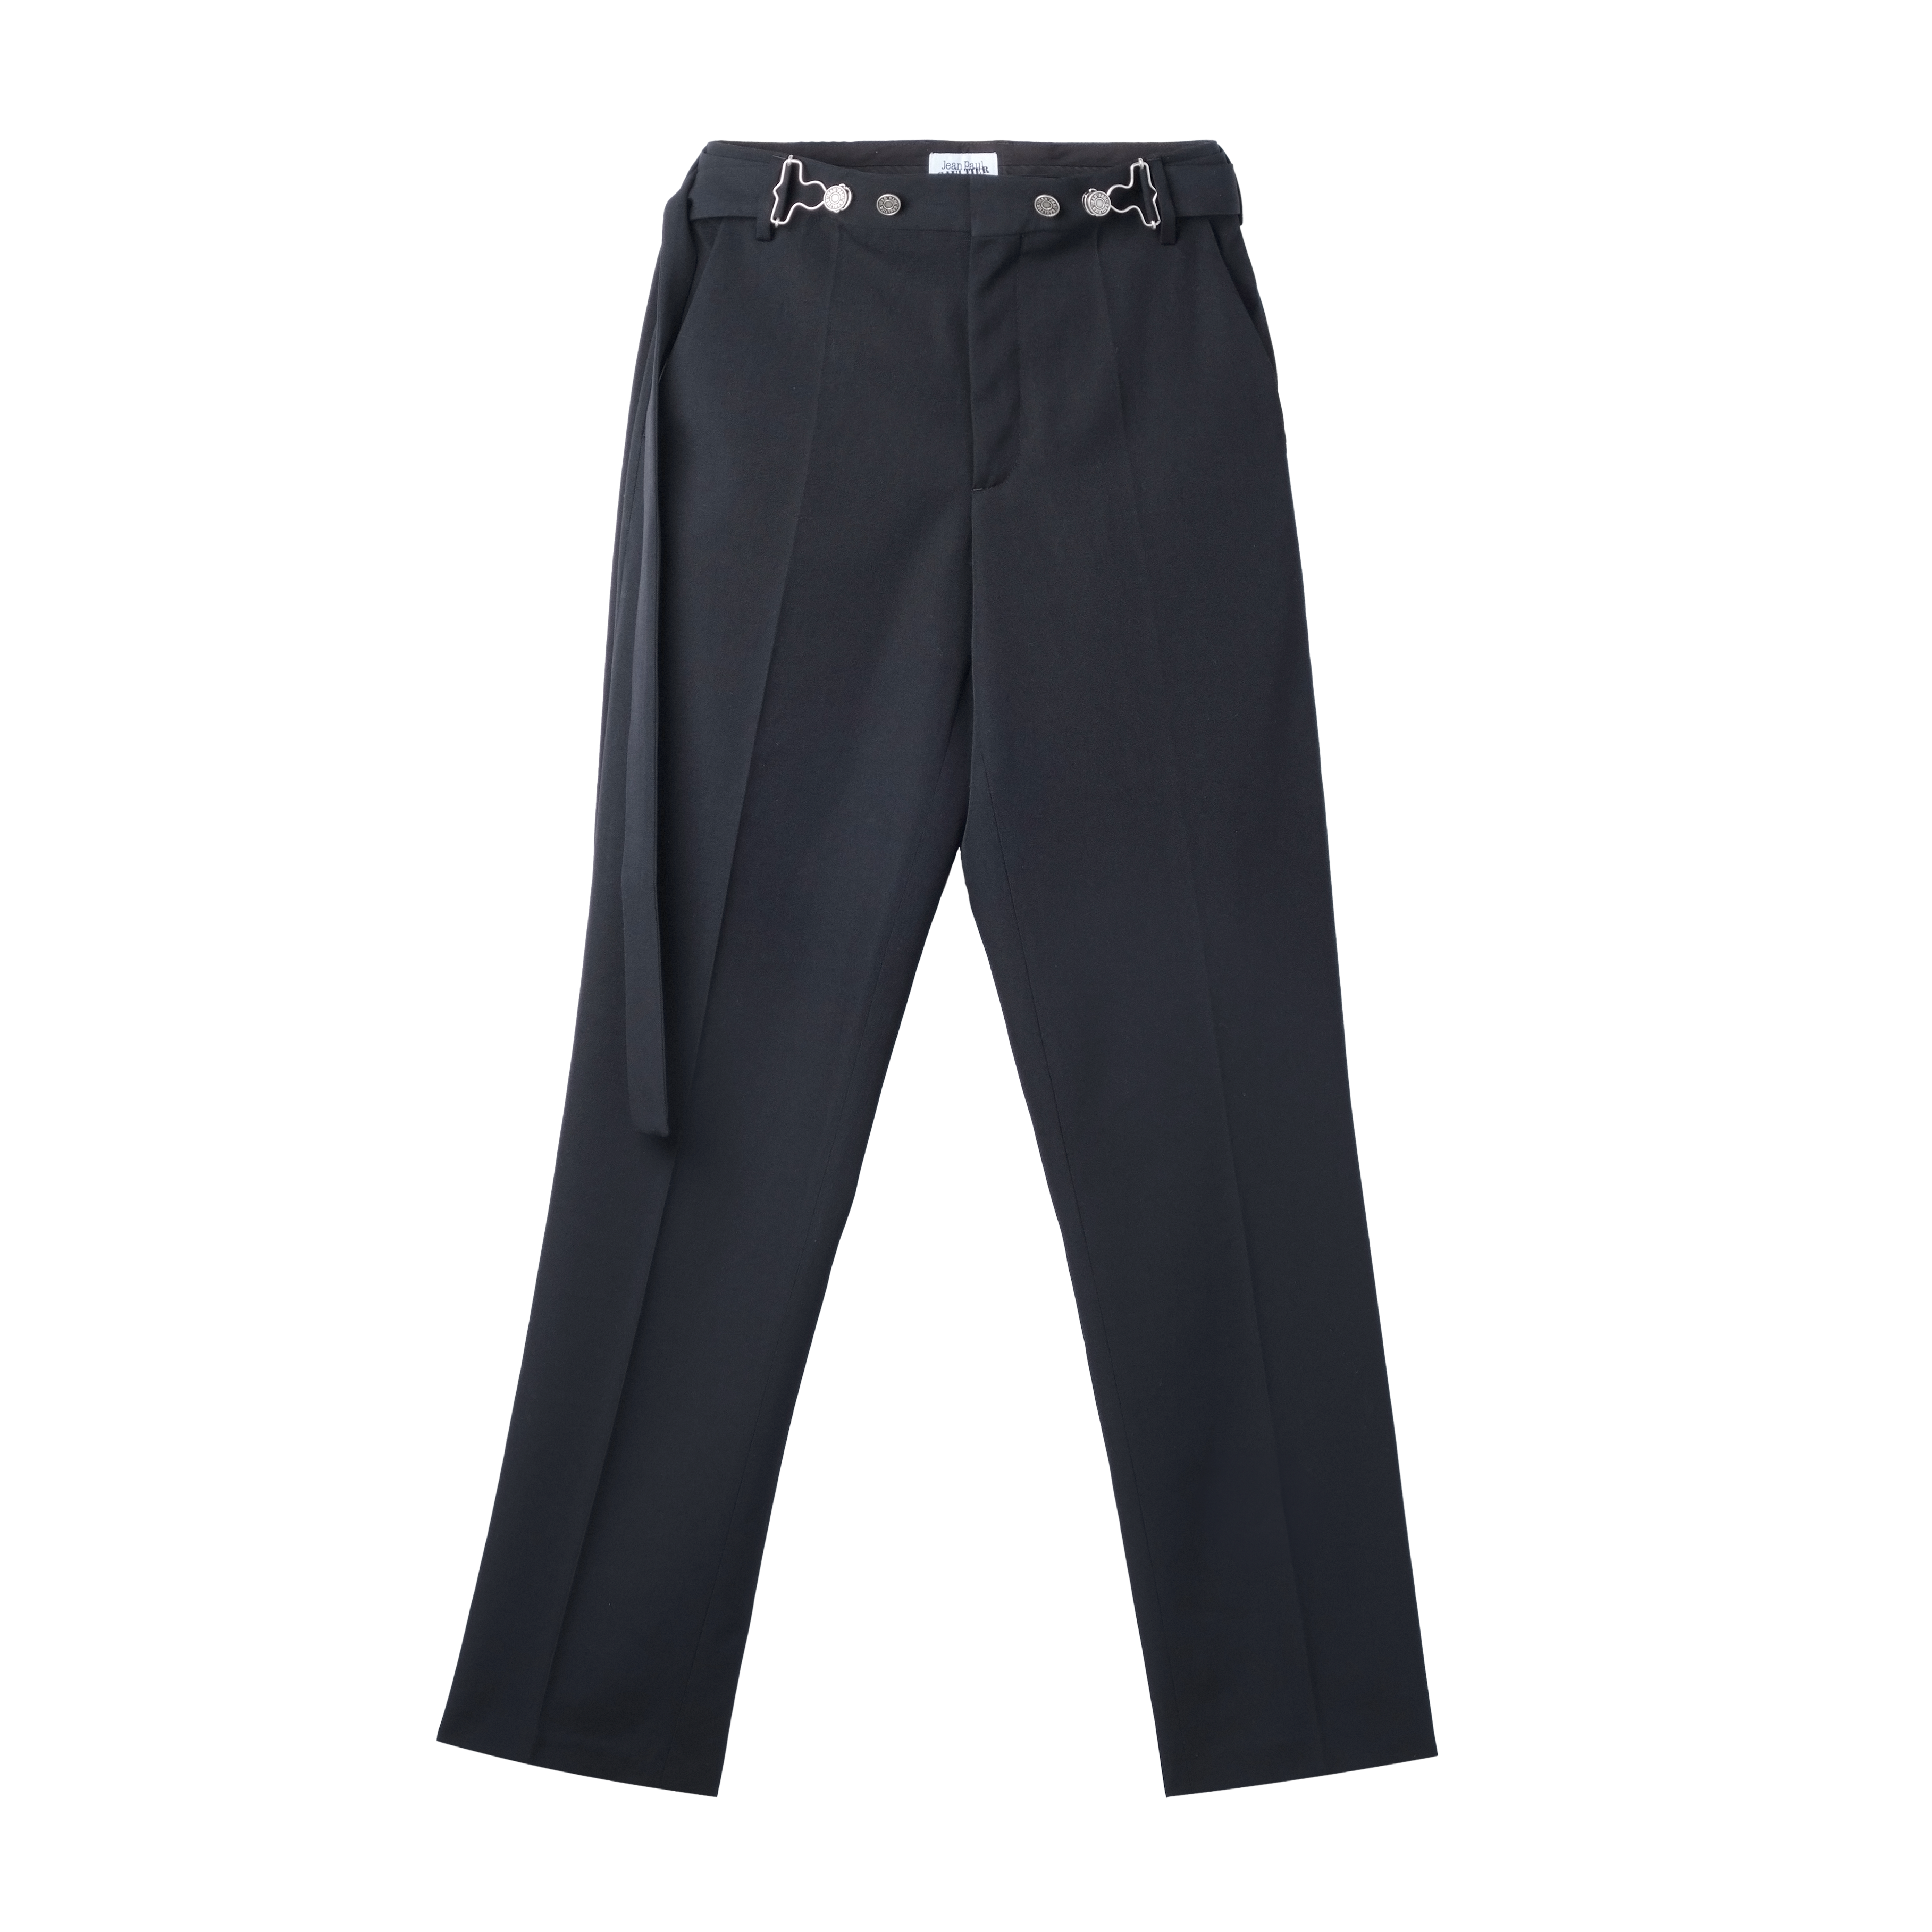 JEAN PAUL GAULTIER PANT WITH OVERALL BUCKLES DETAIL ON BELT BLACK